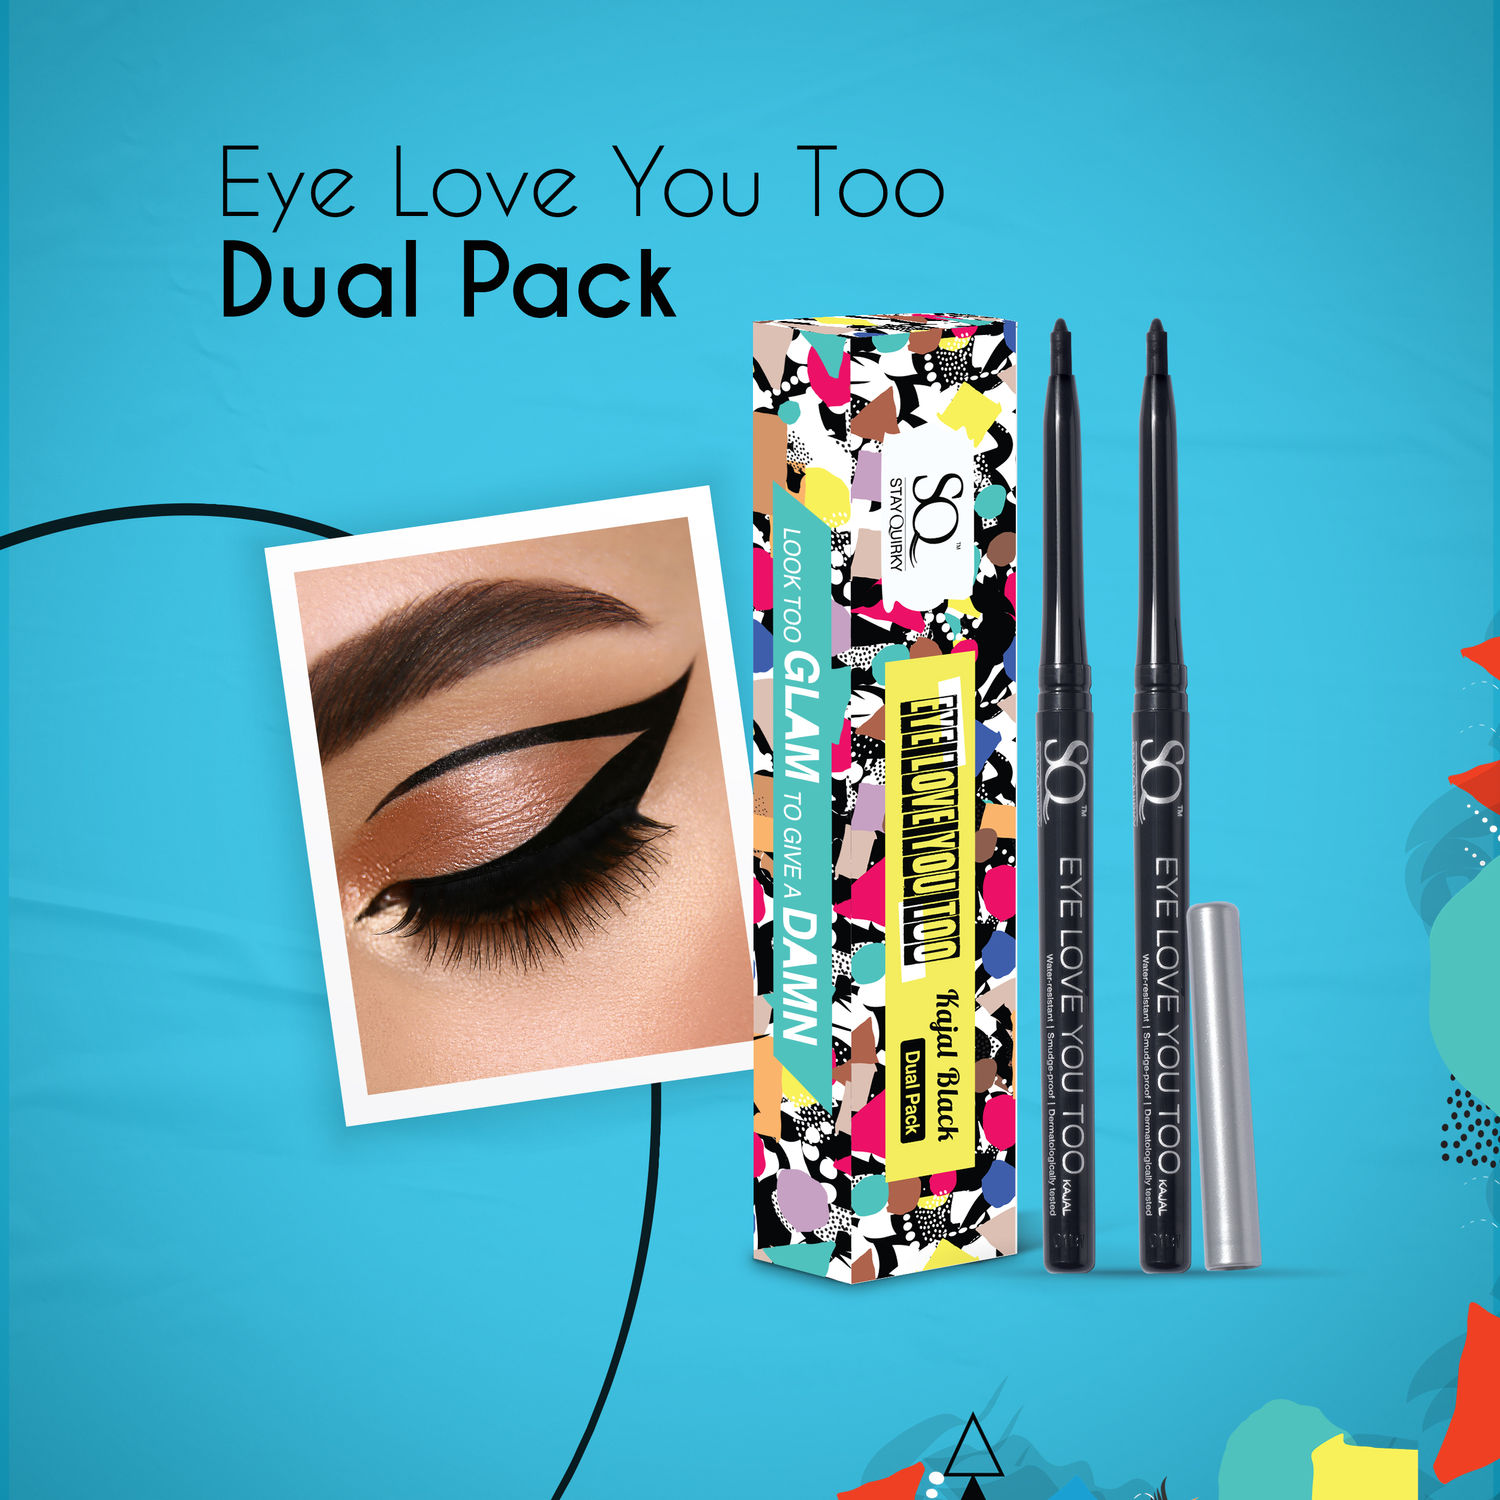 Buy Stay Quirky Kajal Super Black Eye Love You Too| Long Lasting| Smudgeproof| Water resistent| Vegan| Dermatologically tested|Intense Pigmentation - Dual Pack (0.35 g X 2) - Purplle